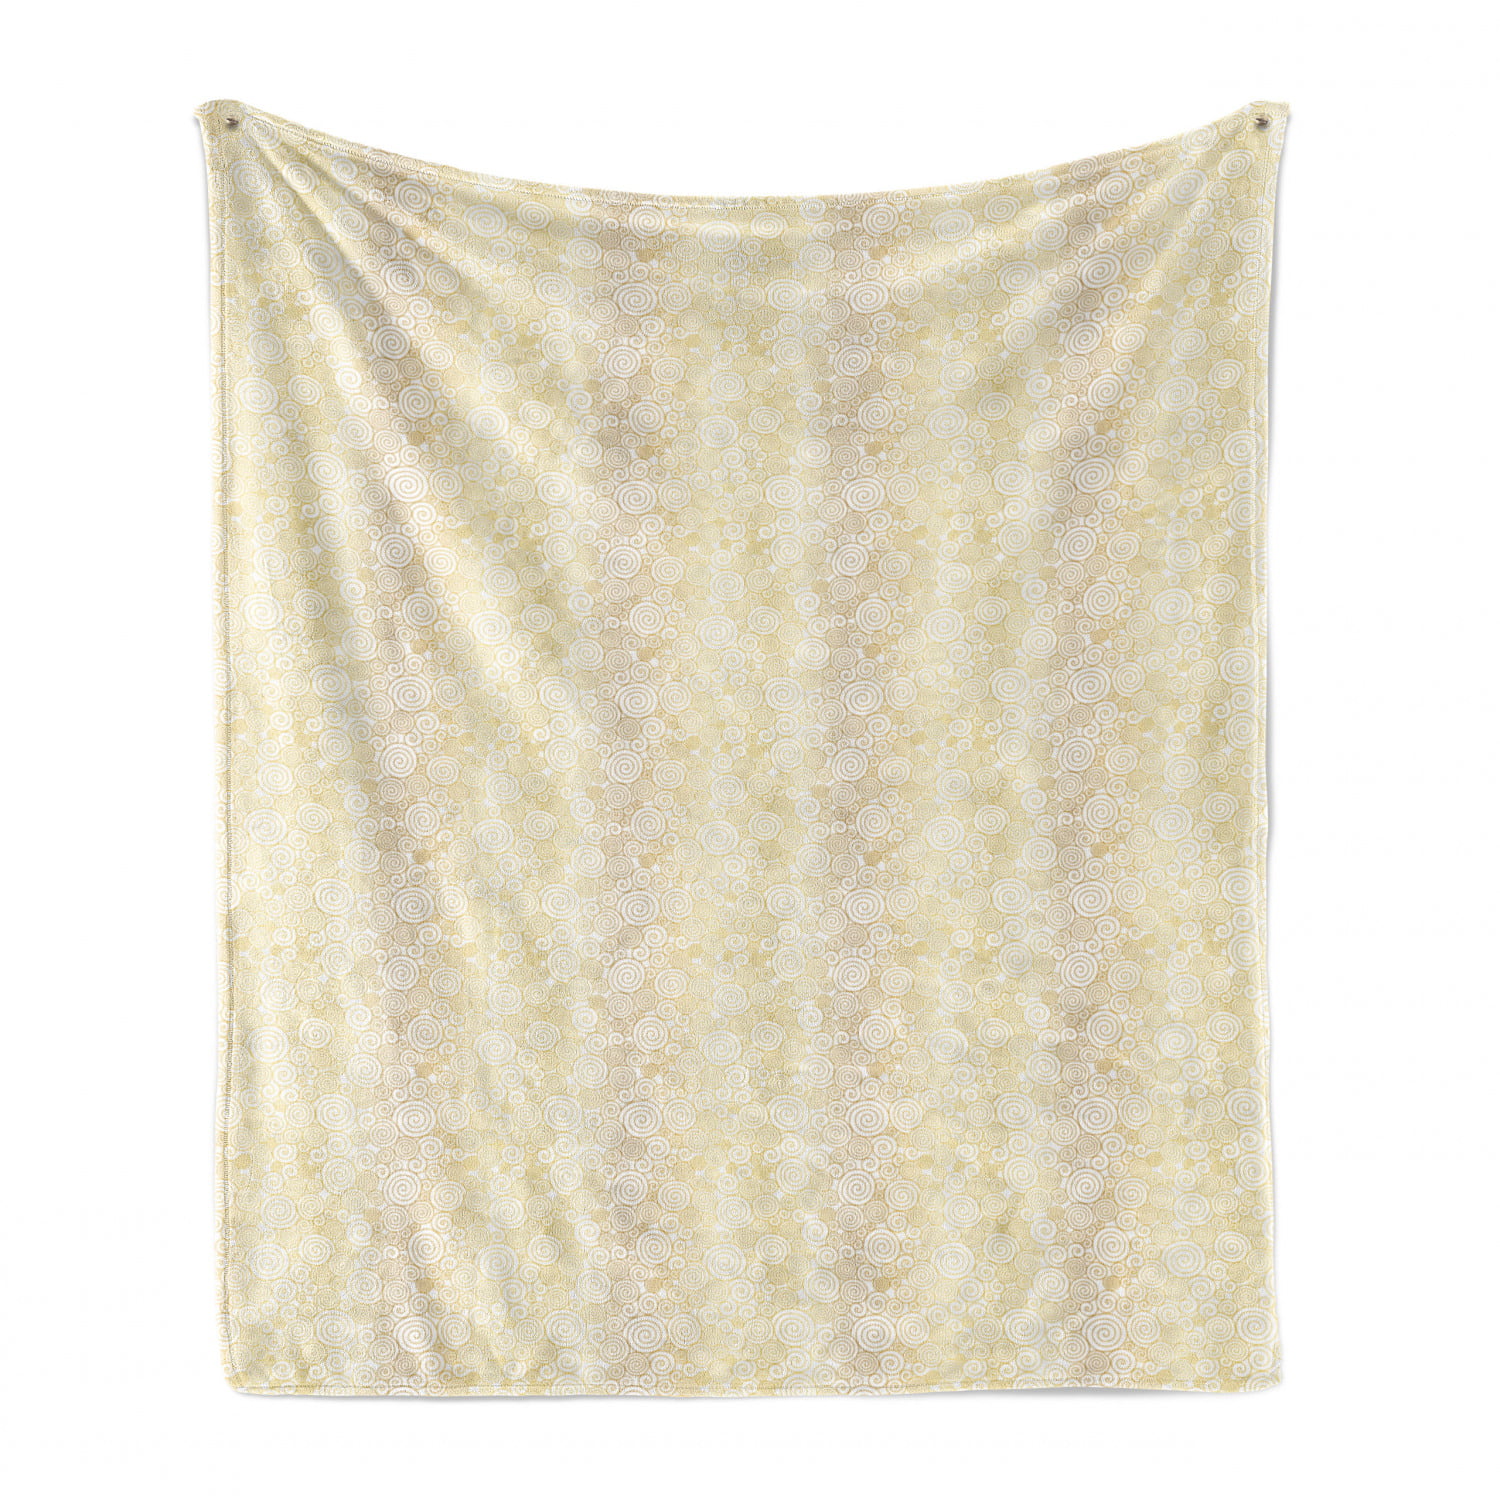 Fleece Woven- Throw Blanket for Bedroom Living Rooms Sofa Couch I Customize Gold Art Geometric Golden Pattern Sherpa Geometric- Printed Soft Cozy Lightweight Durable Plush 